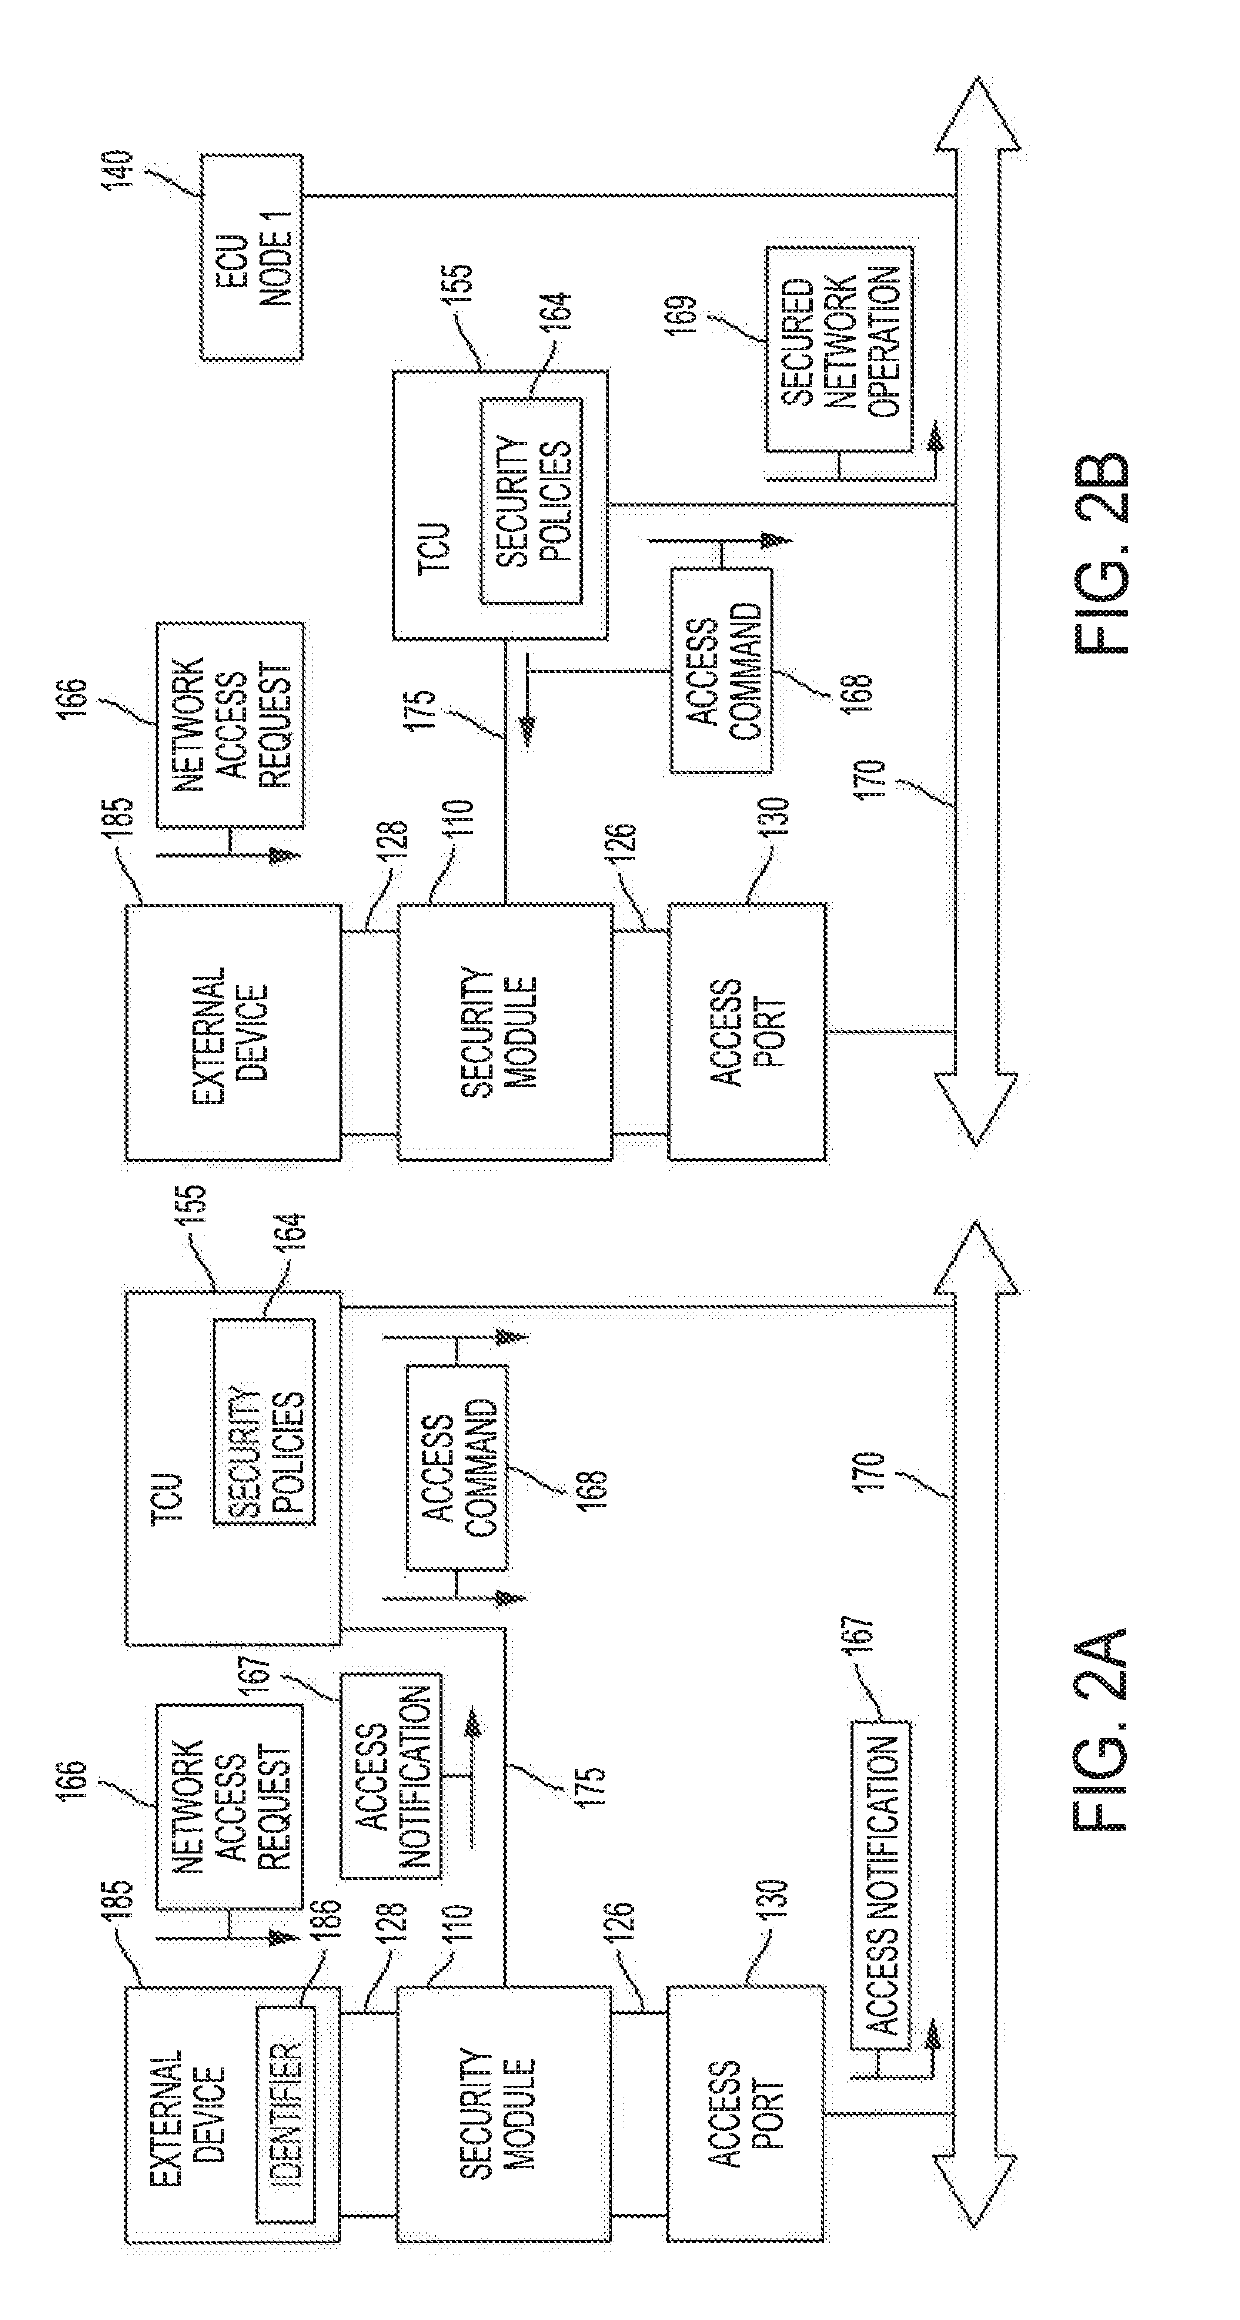 Systems and methods for securing an automotive controller network